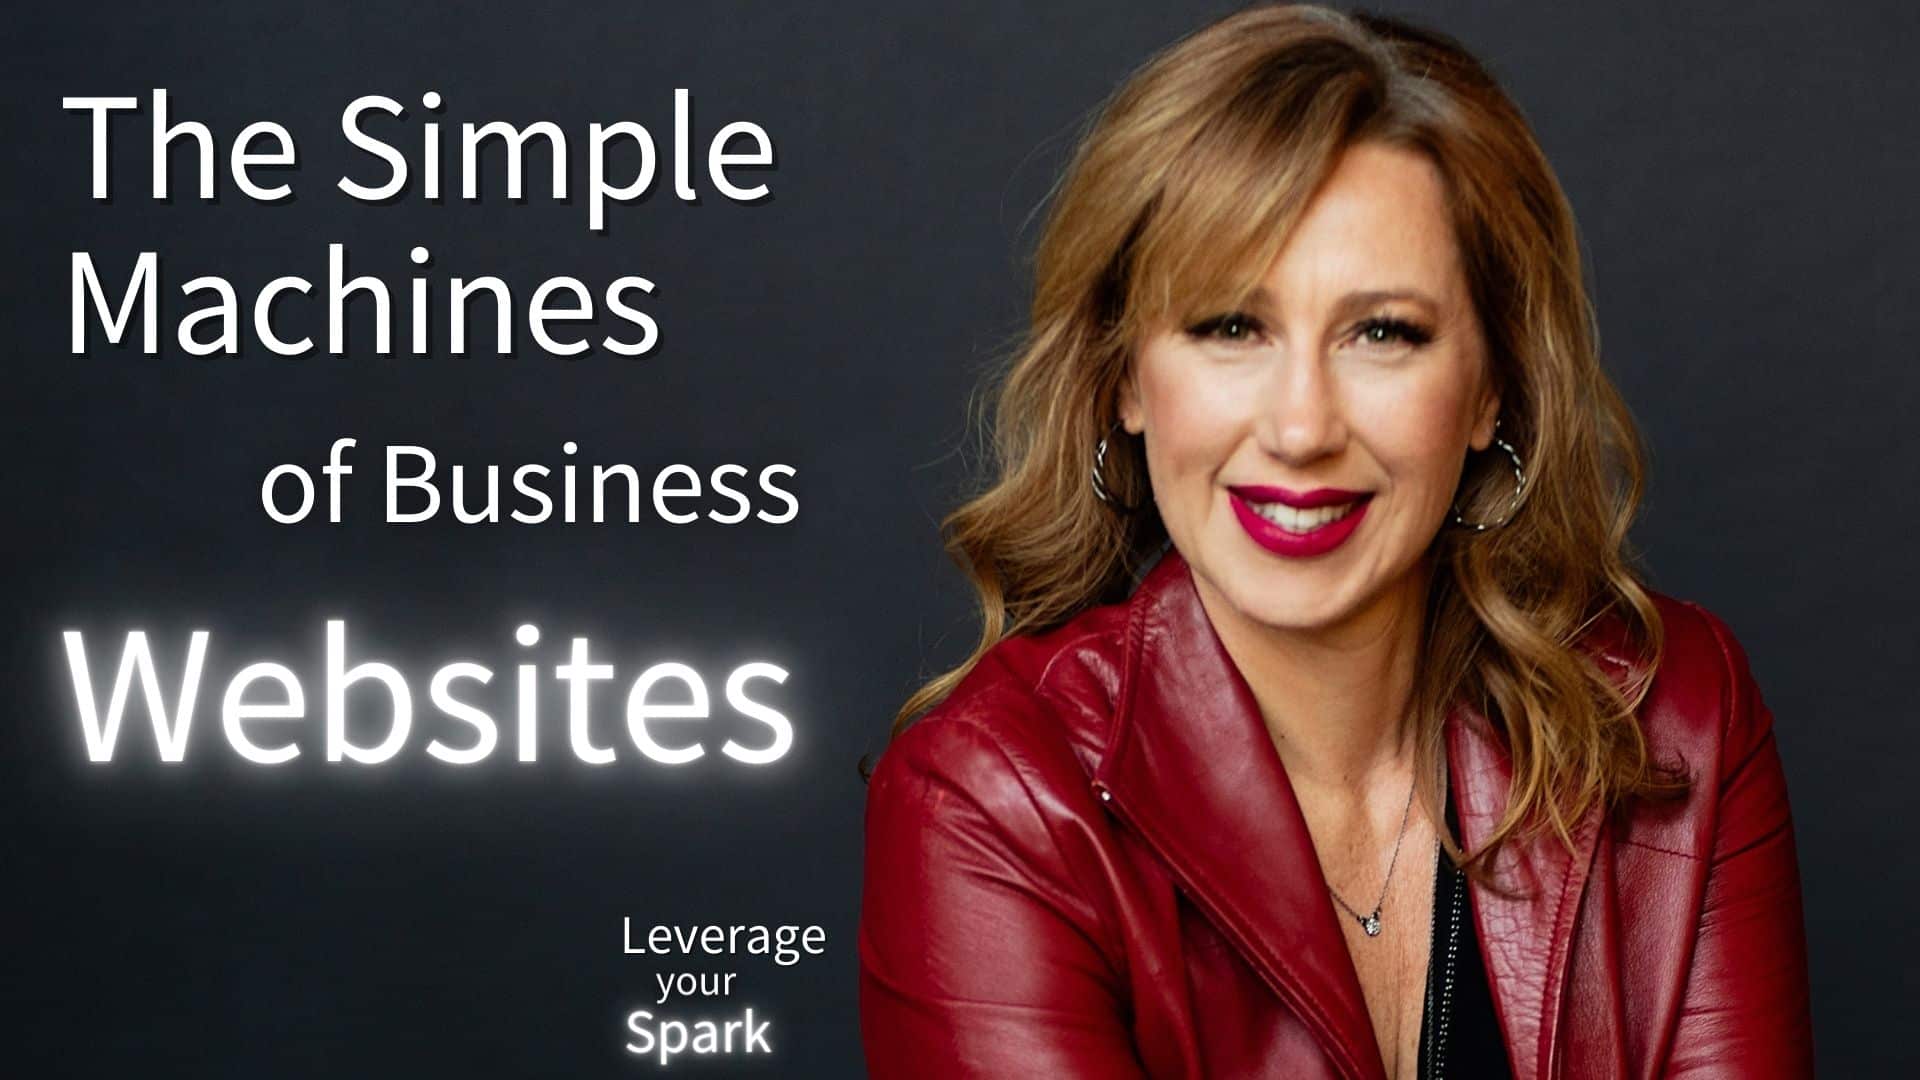 The Simple Machines of Business: Websites